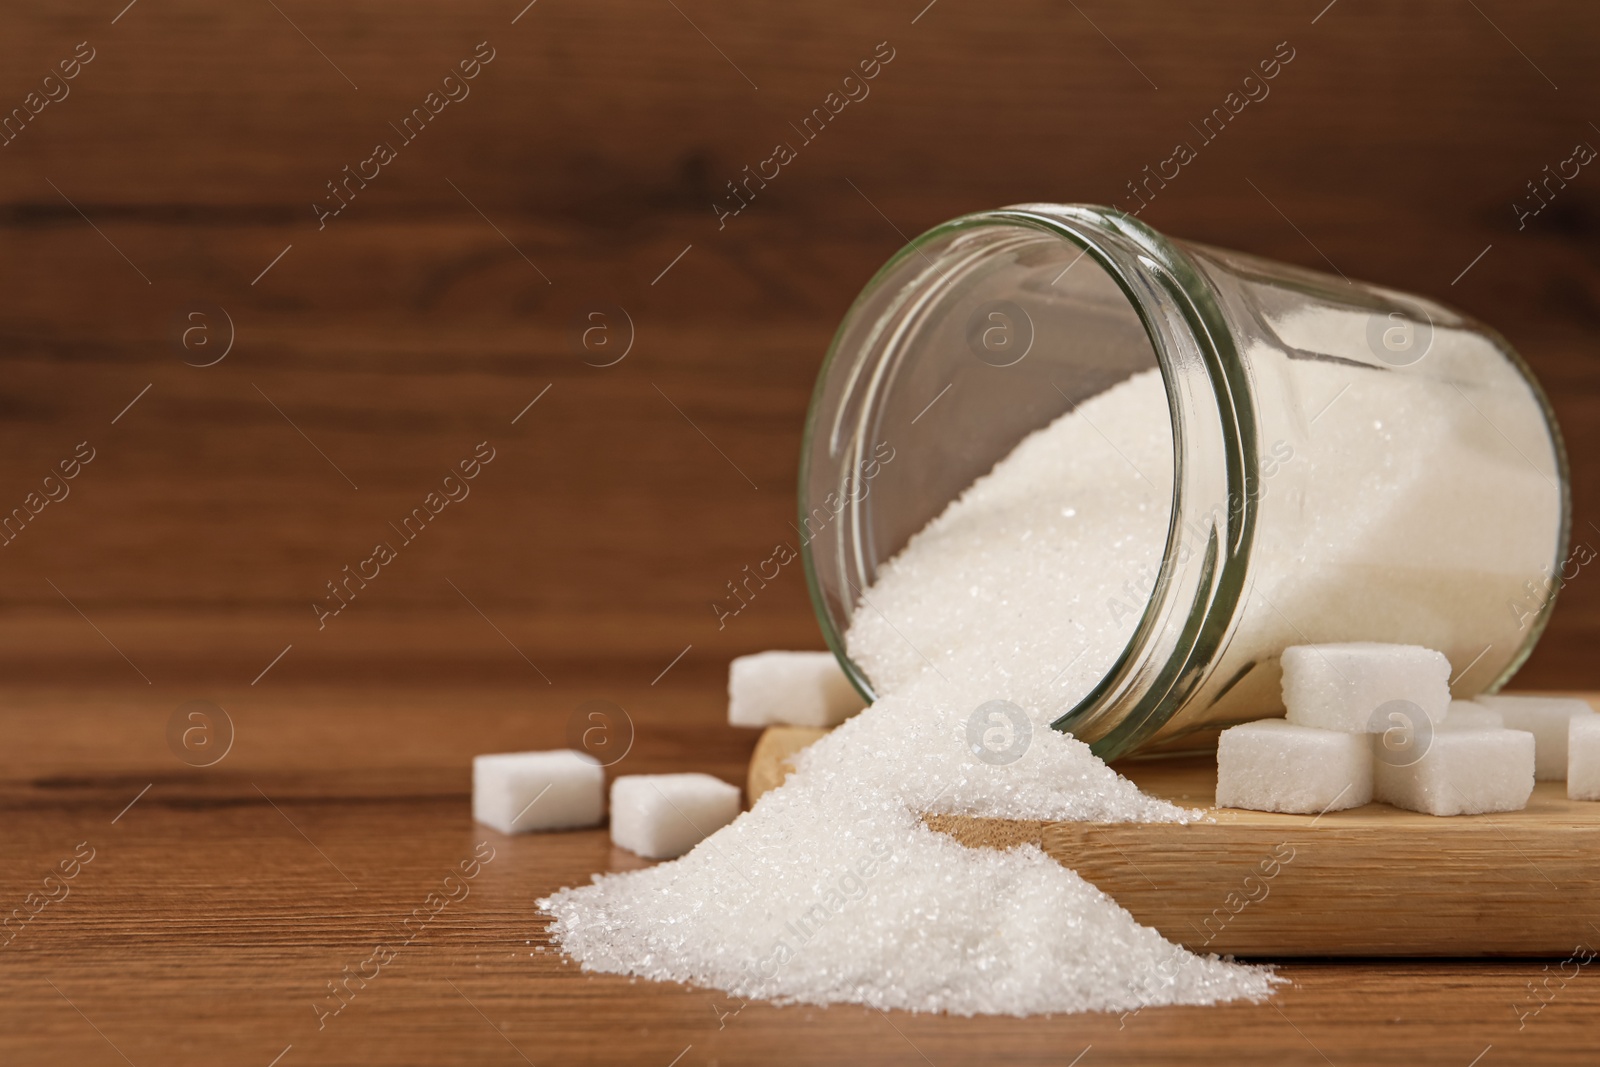 Photo of Overturned jar and white sugar on wooden table, space for text